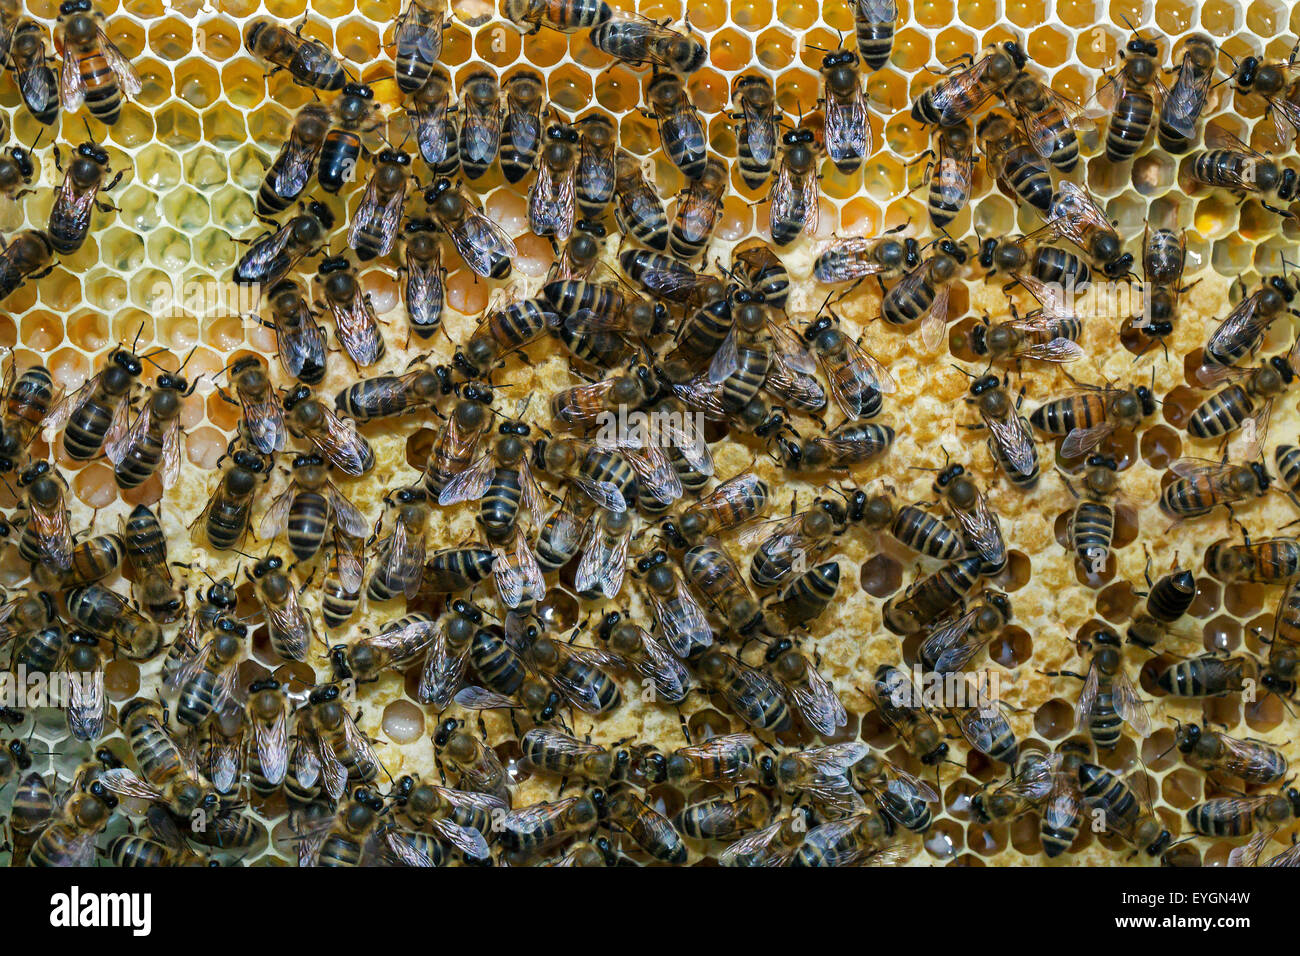 Worker honey bees (Apis mellifera) on honeycomb in bee hive Stock Photo